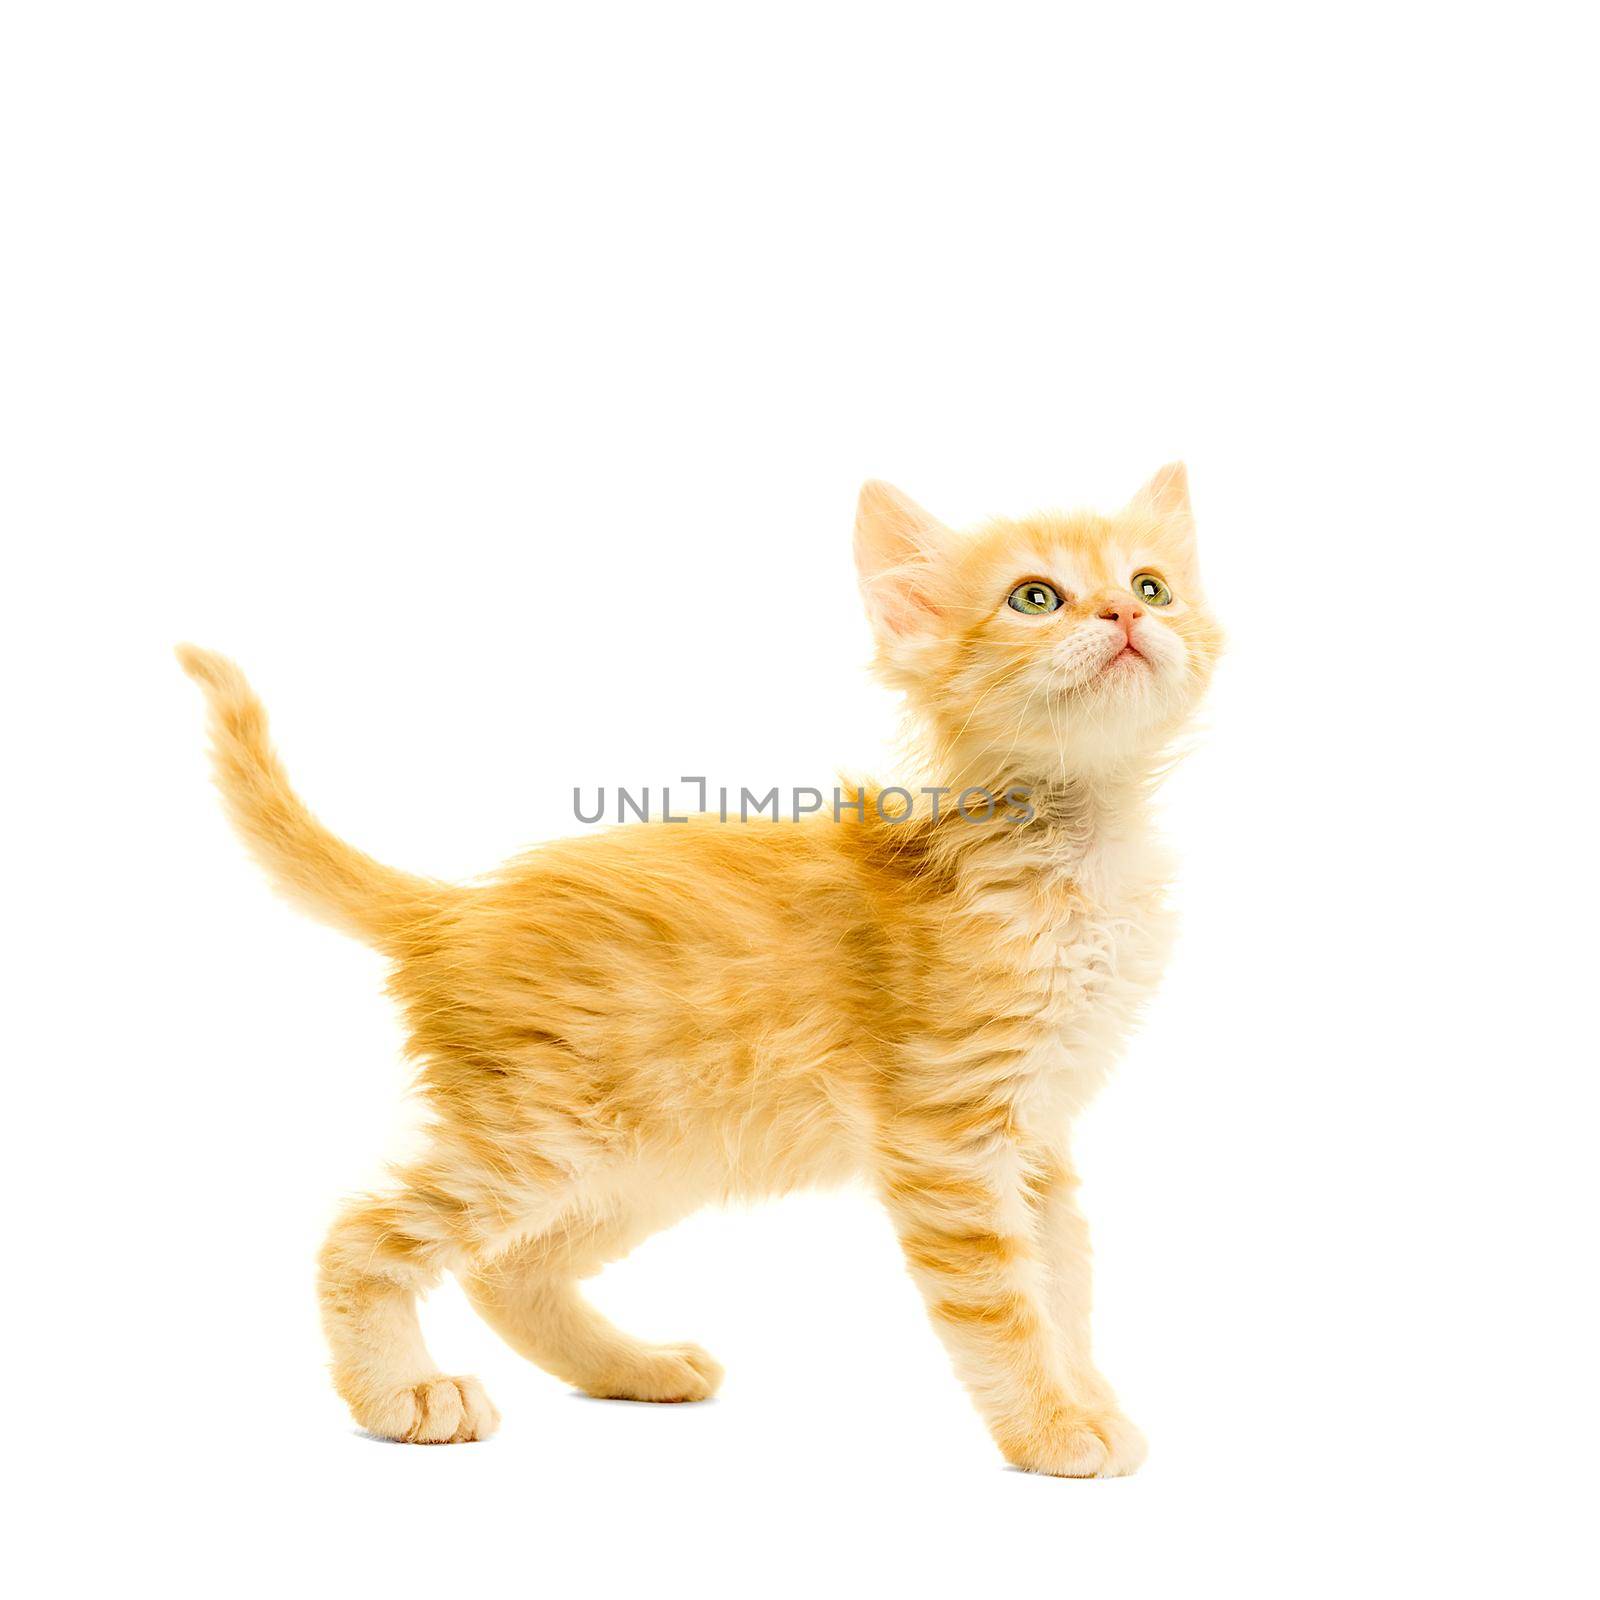 Tabby turkish angora cat kitten looking up standing isolated on a white background